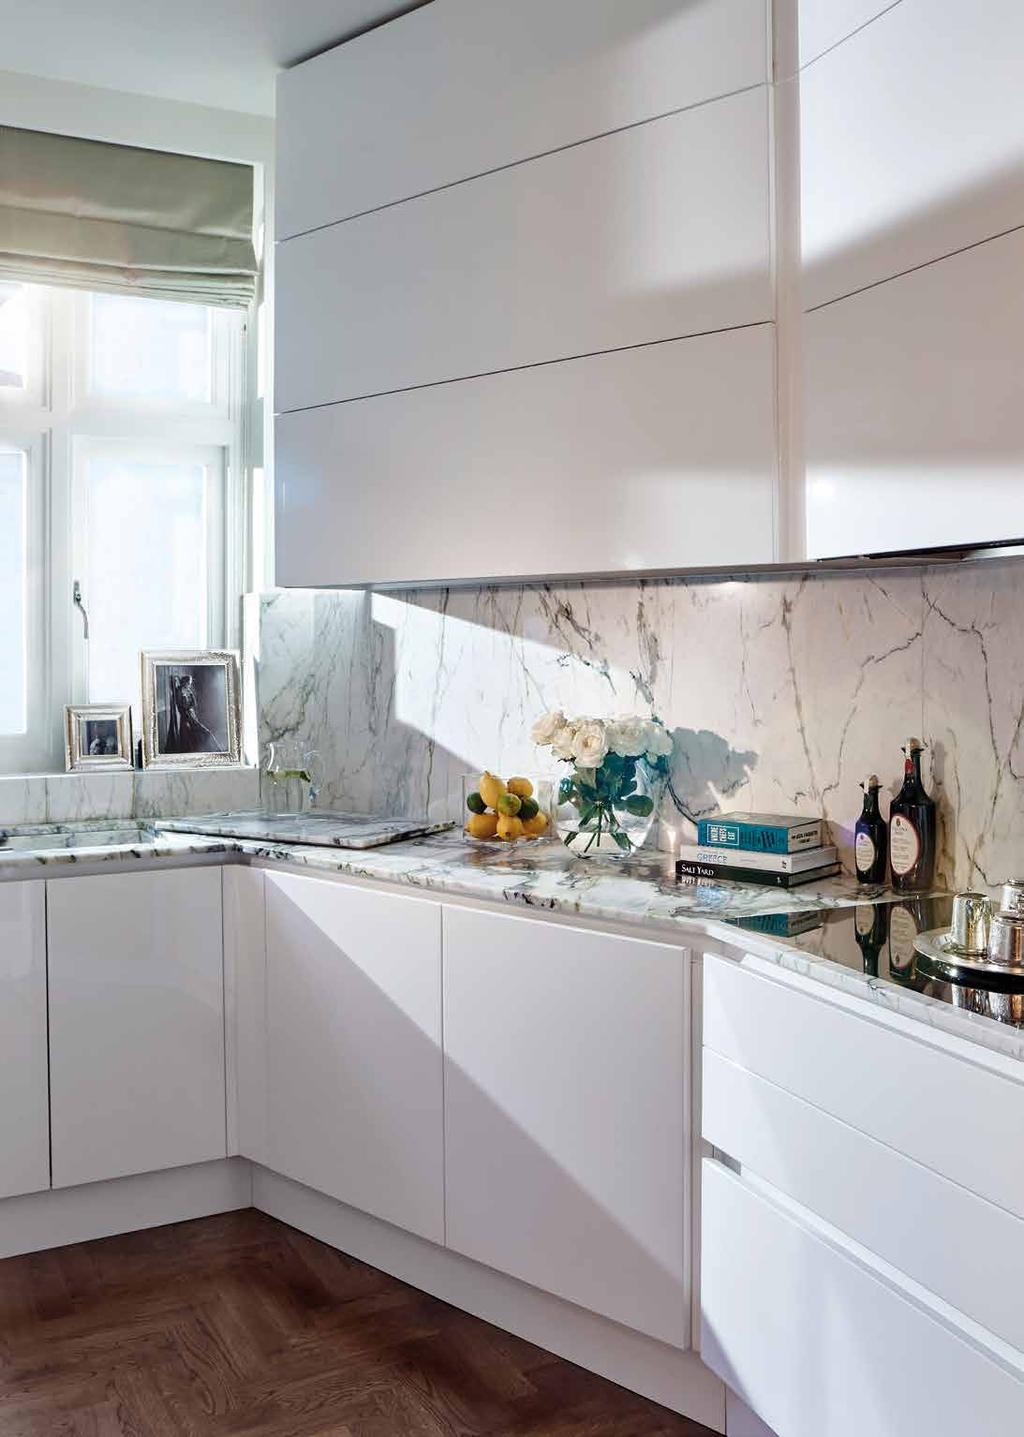 KITCHEN PROPERTY FEATURES MORNING TO EVENING Green veined Calacatta marble dresses the worktop of the bespoke white lacquered kitchen.